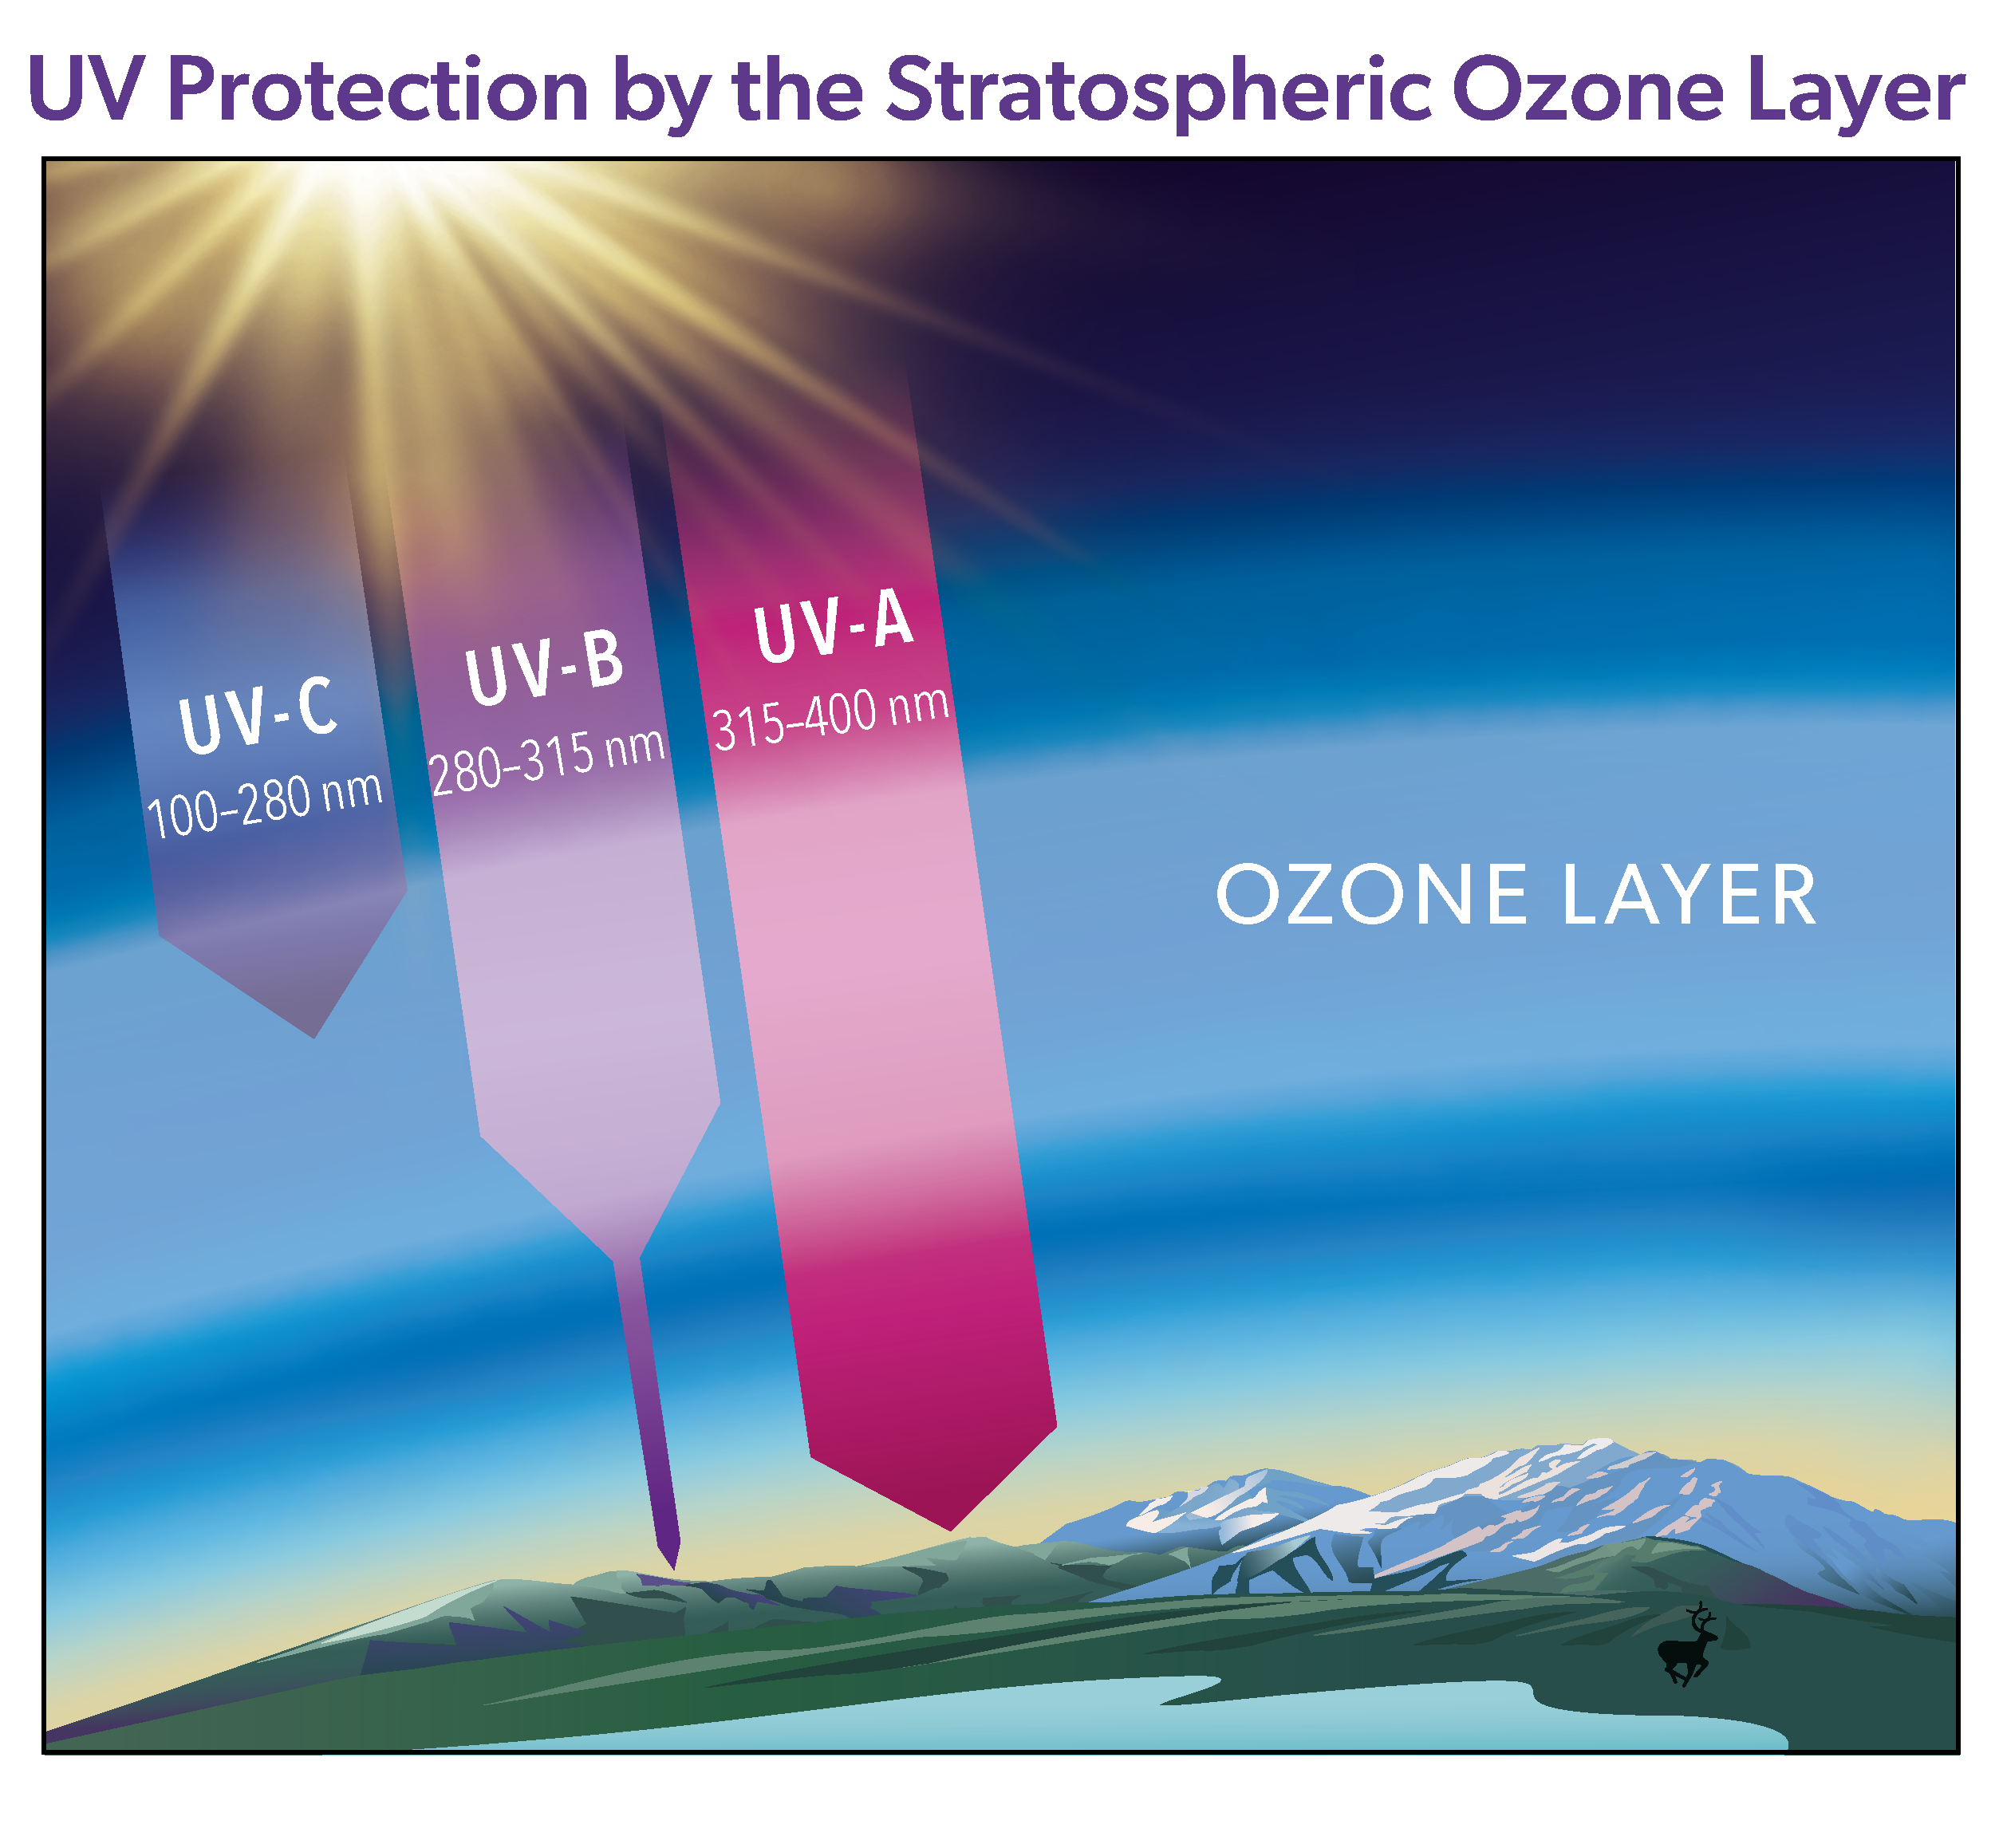 UV Protection by the Stratospheric Ozone Layer